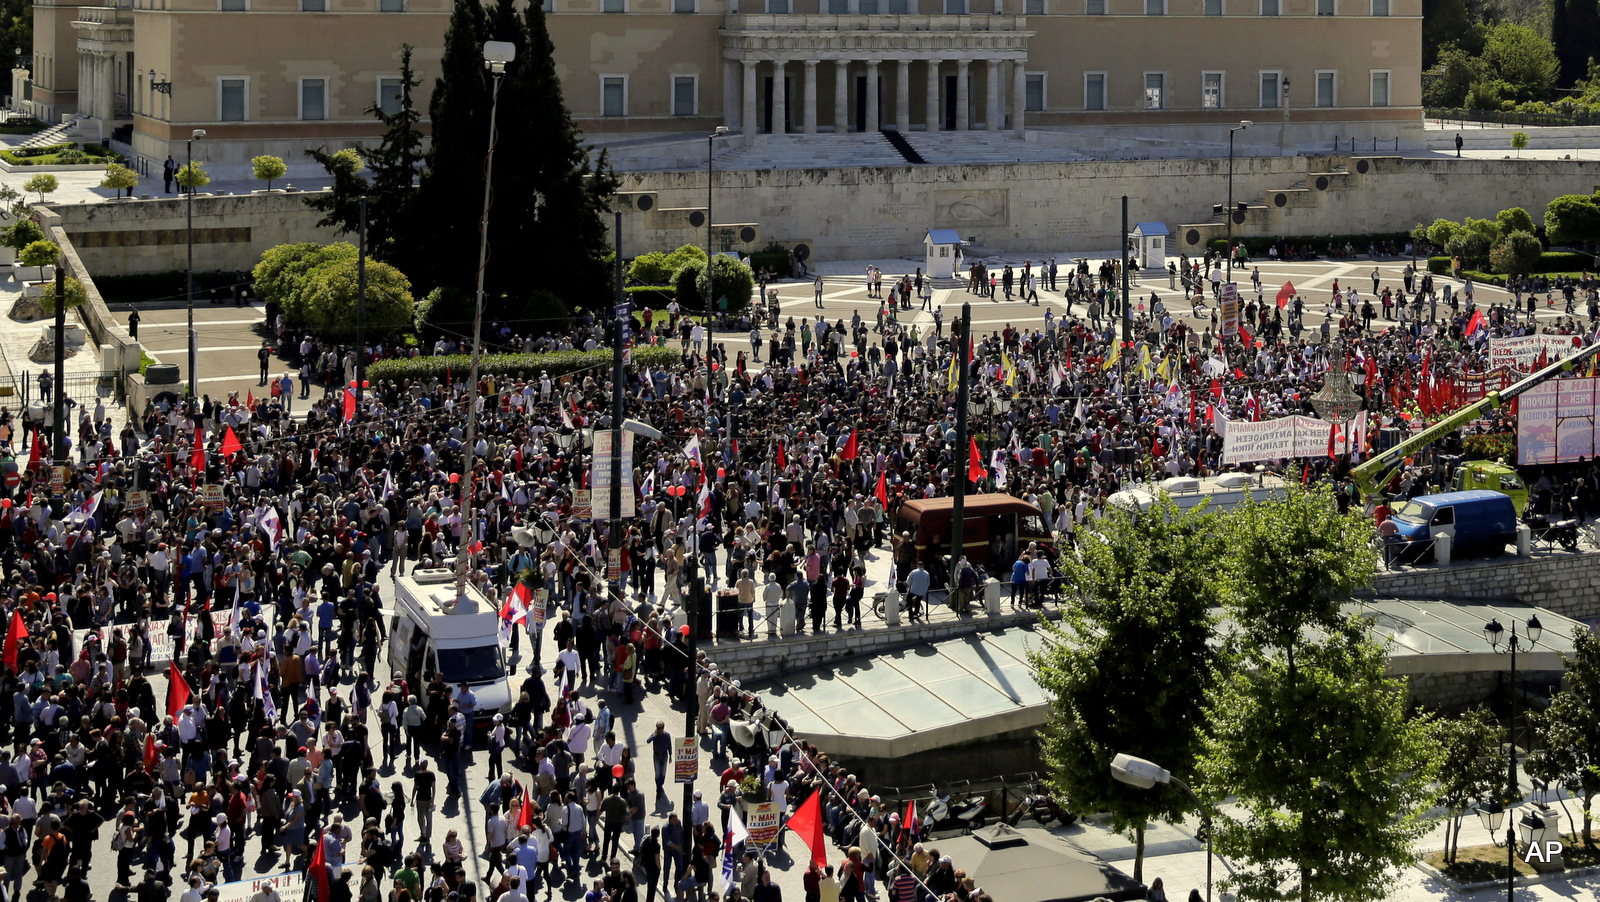 Protestrers take part in a May Day rally  in central Athens, on Friday, May 1, 2015. In financially struggling Greece, an estimated 13,000 people took part in three separate May Day marches in Athens, carrying banners and shouting anti-austerity slogans. 